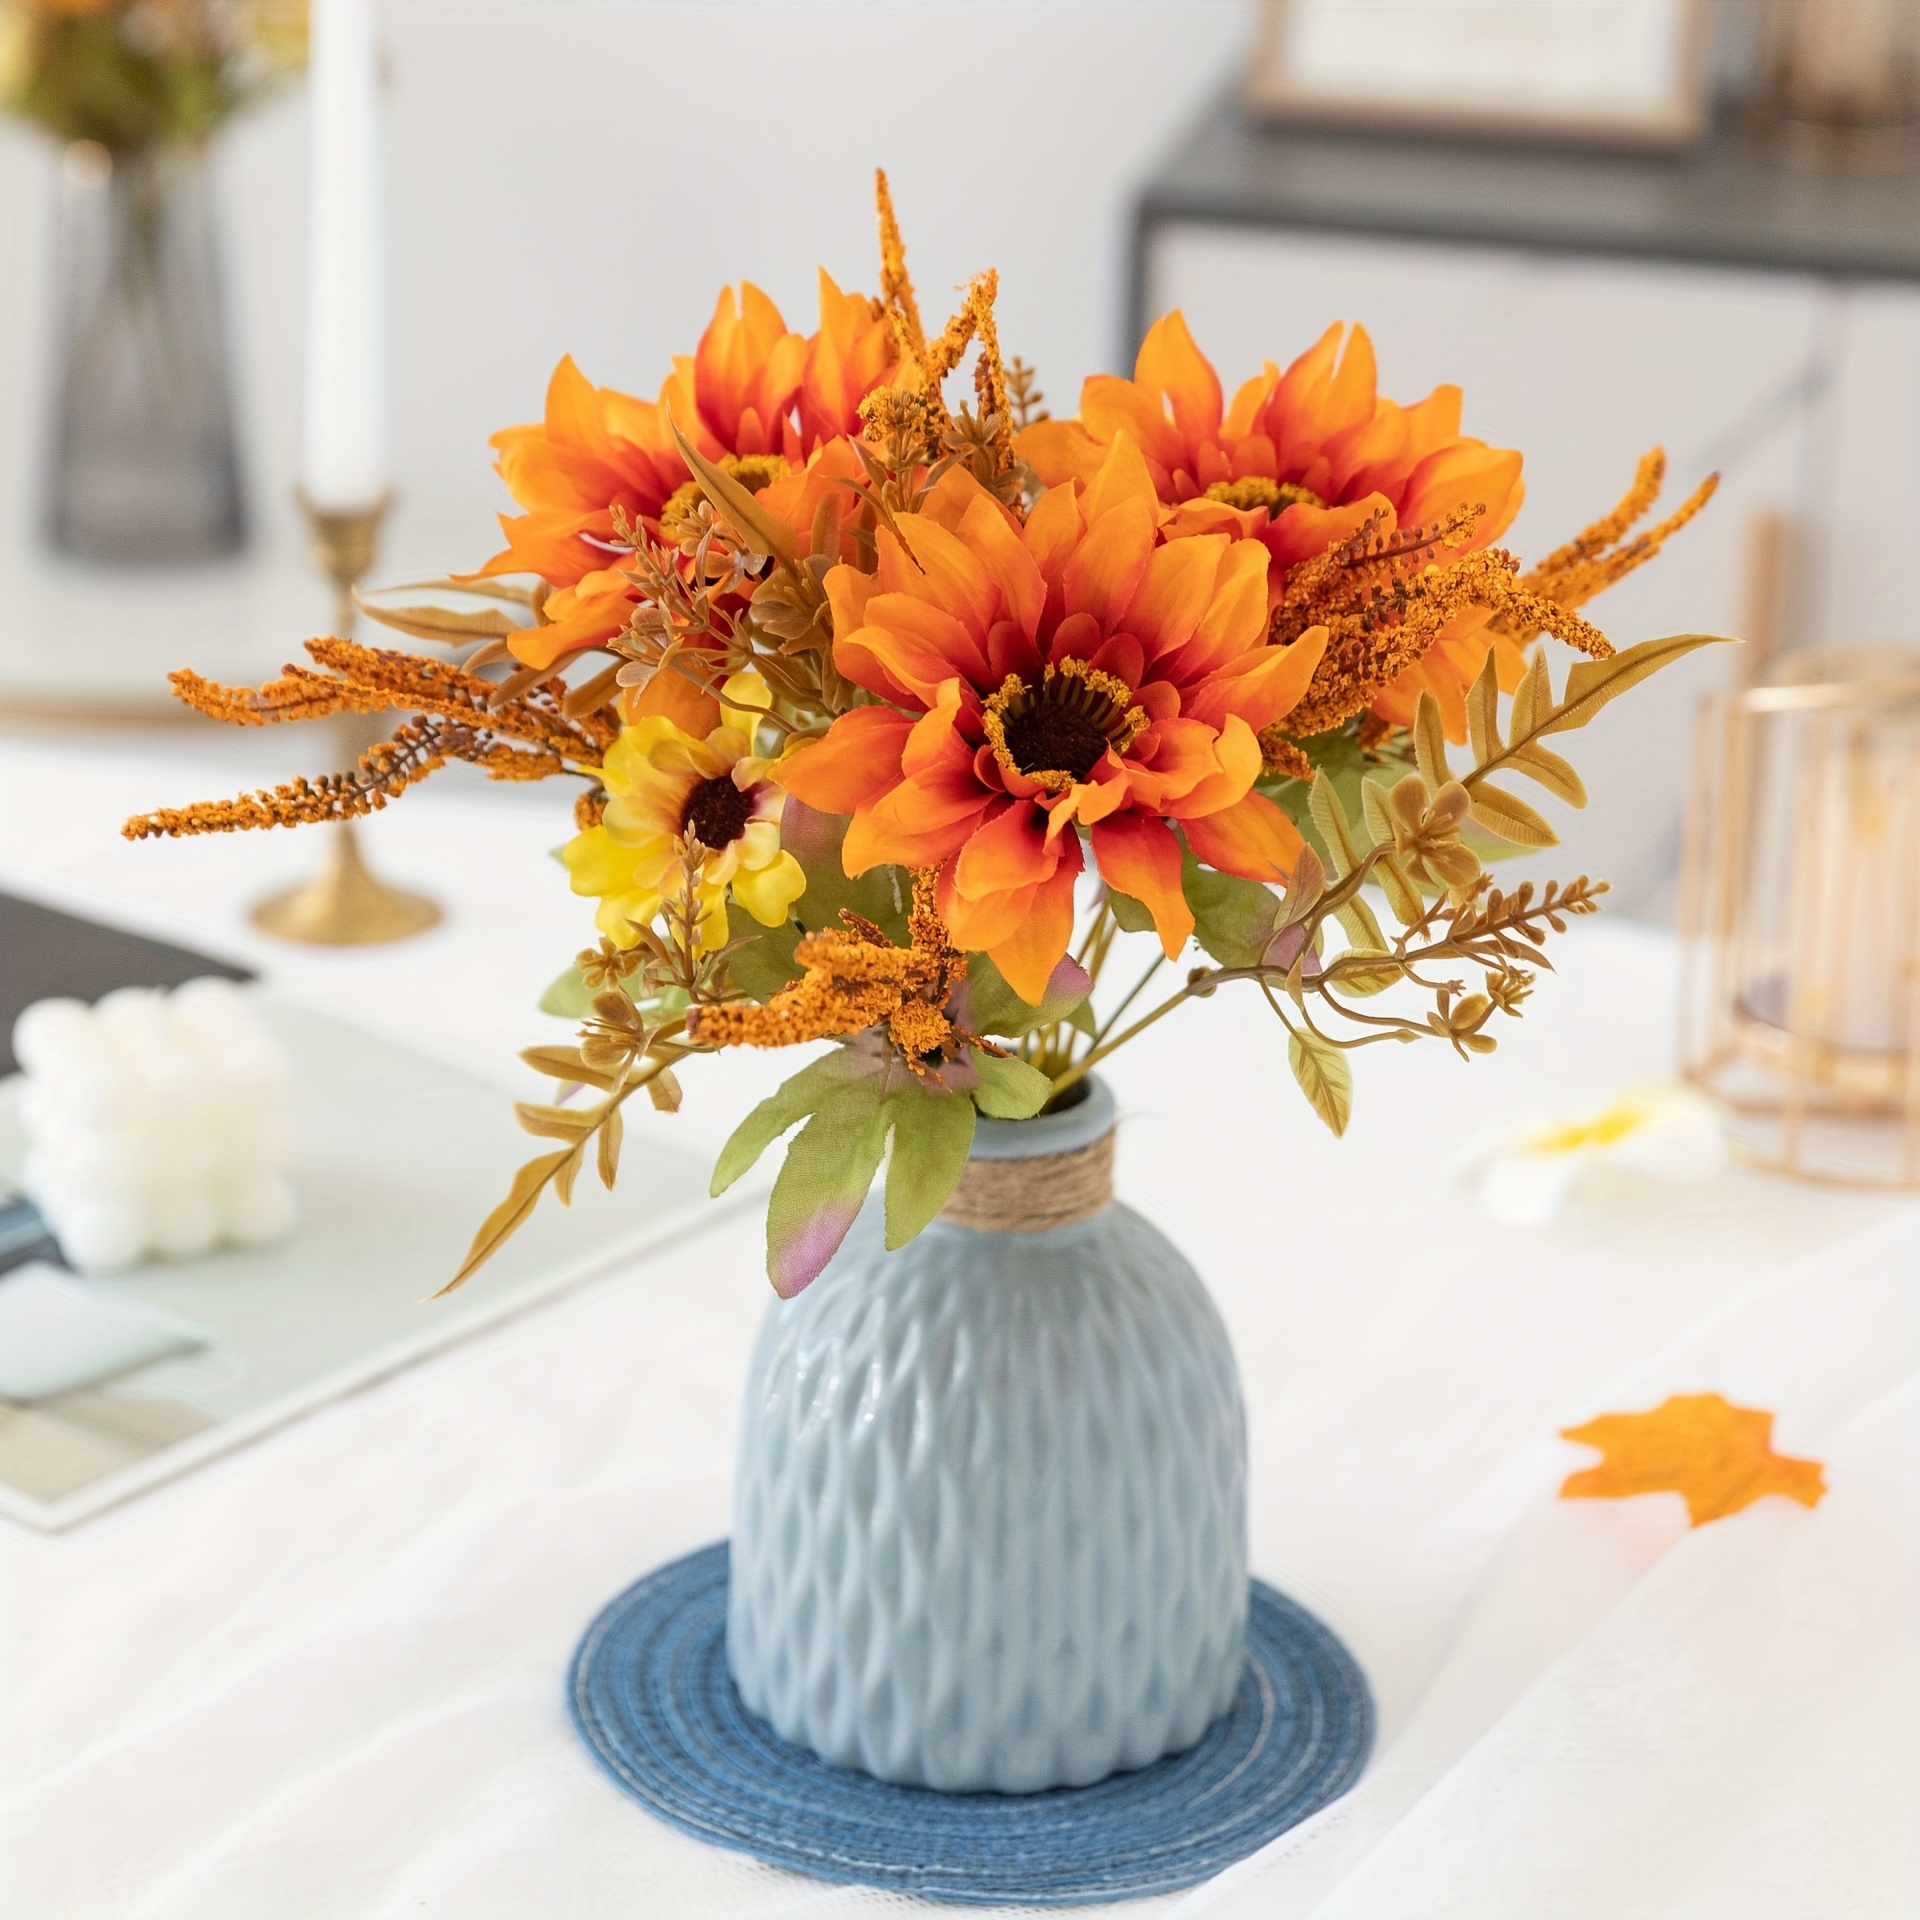 Orange Artificial flowers, decor your home and events with orange artificial flowers, by gardengreen